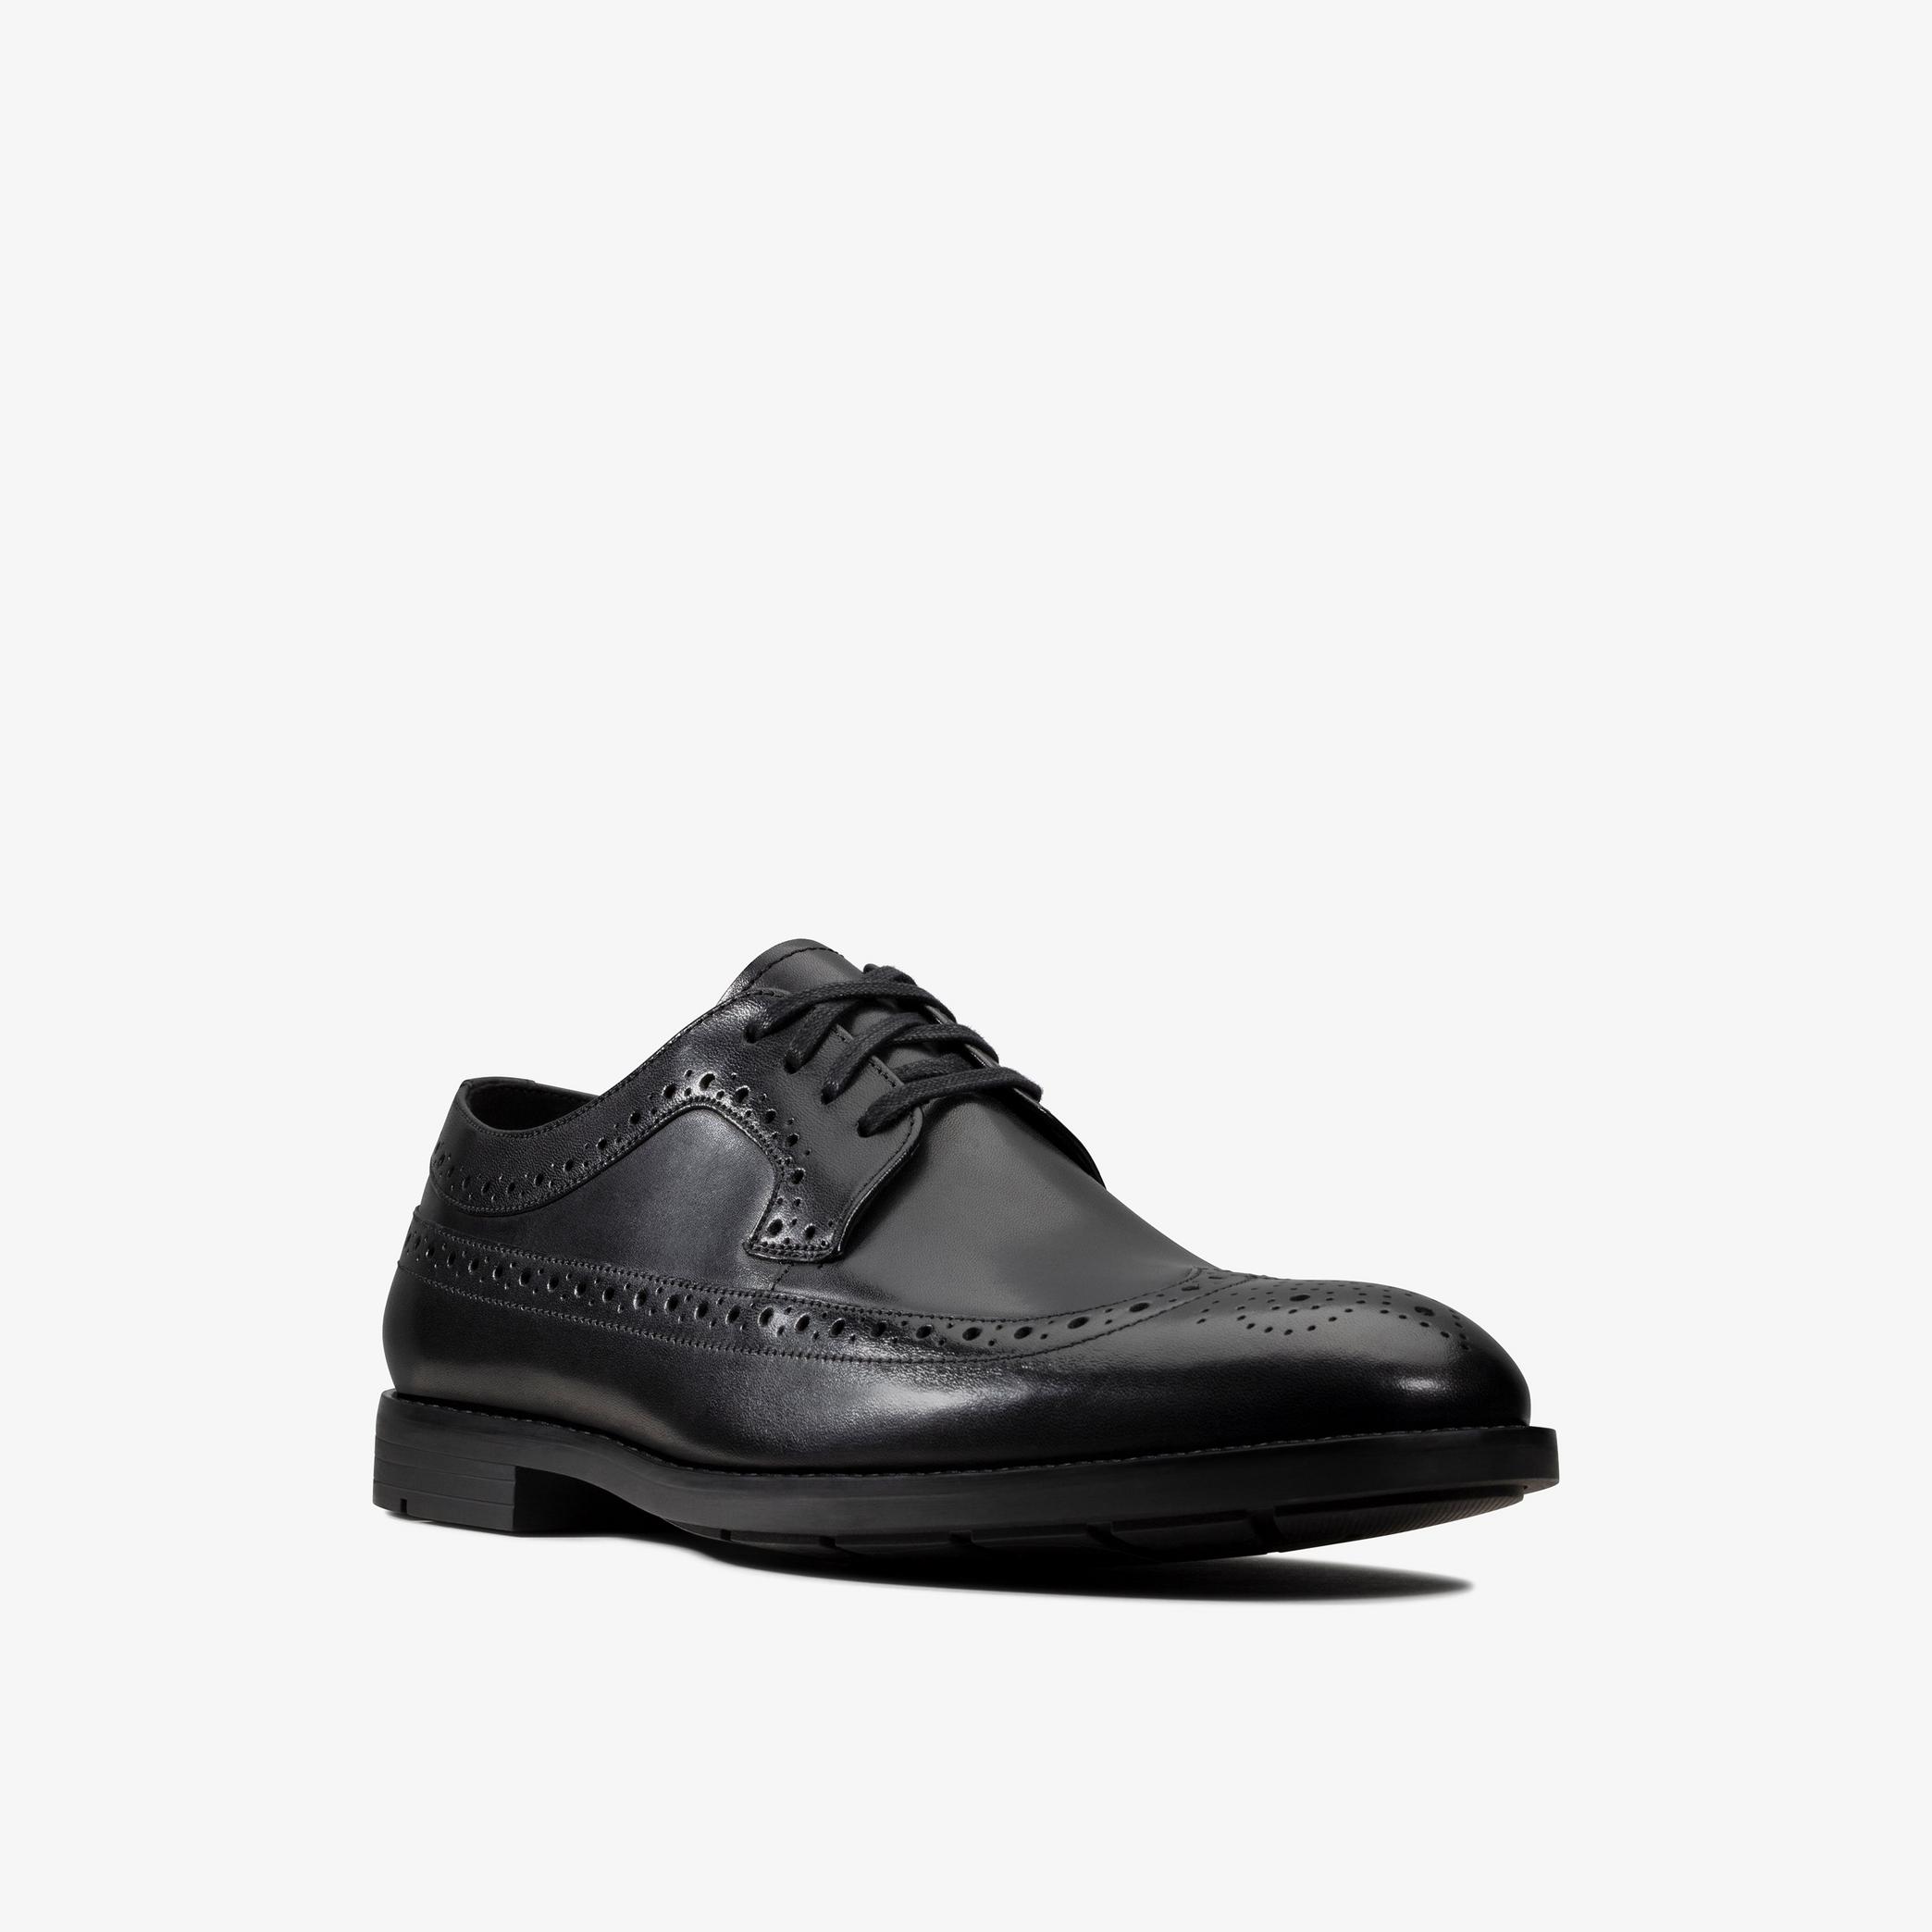 Ronnie Limit Black Leather Brogues, view 3 of 6